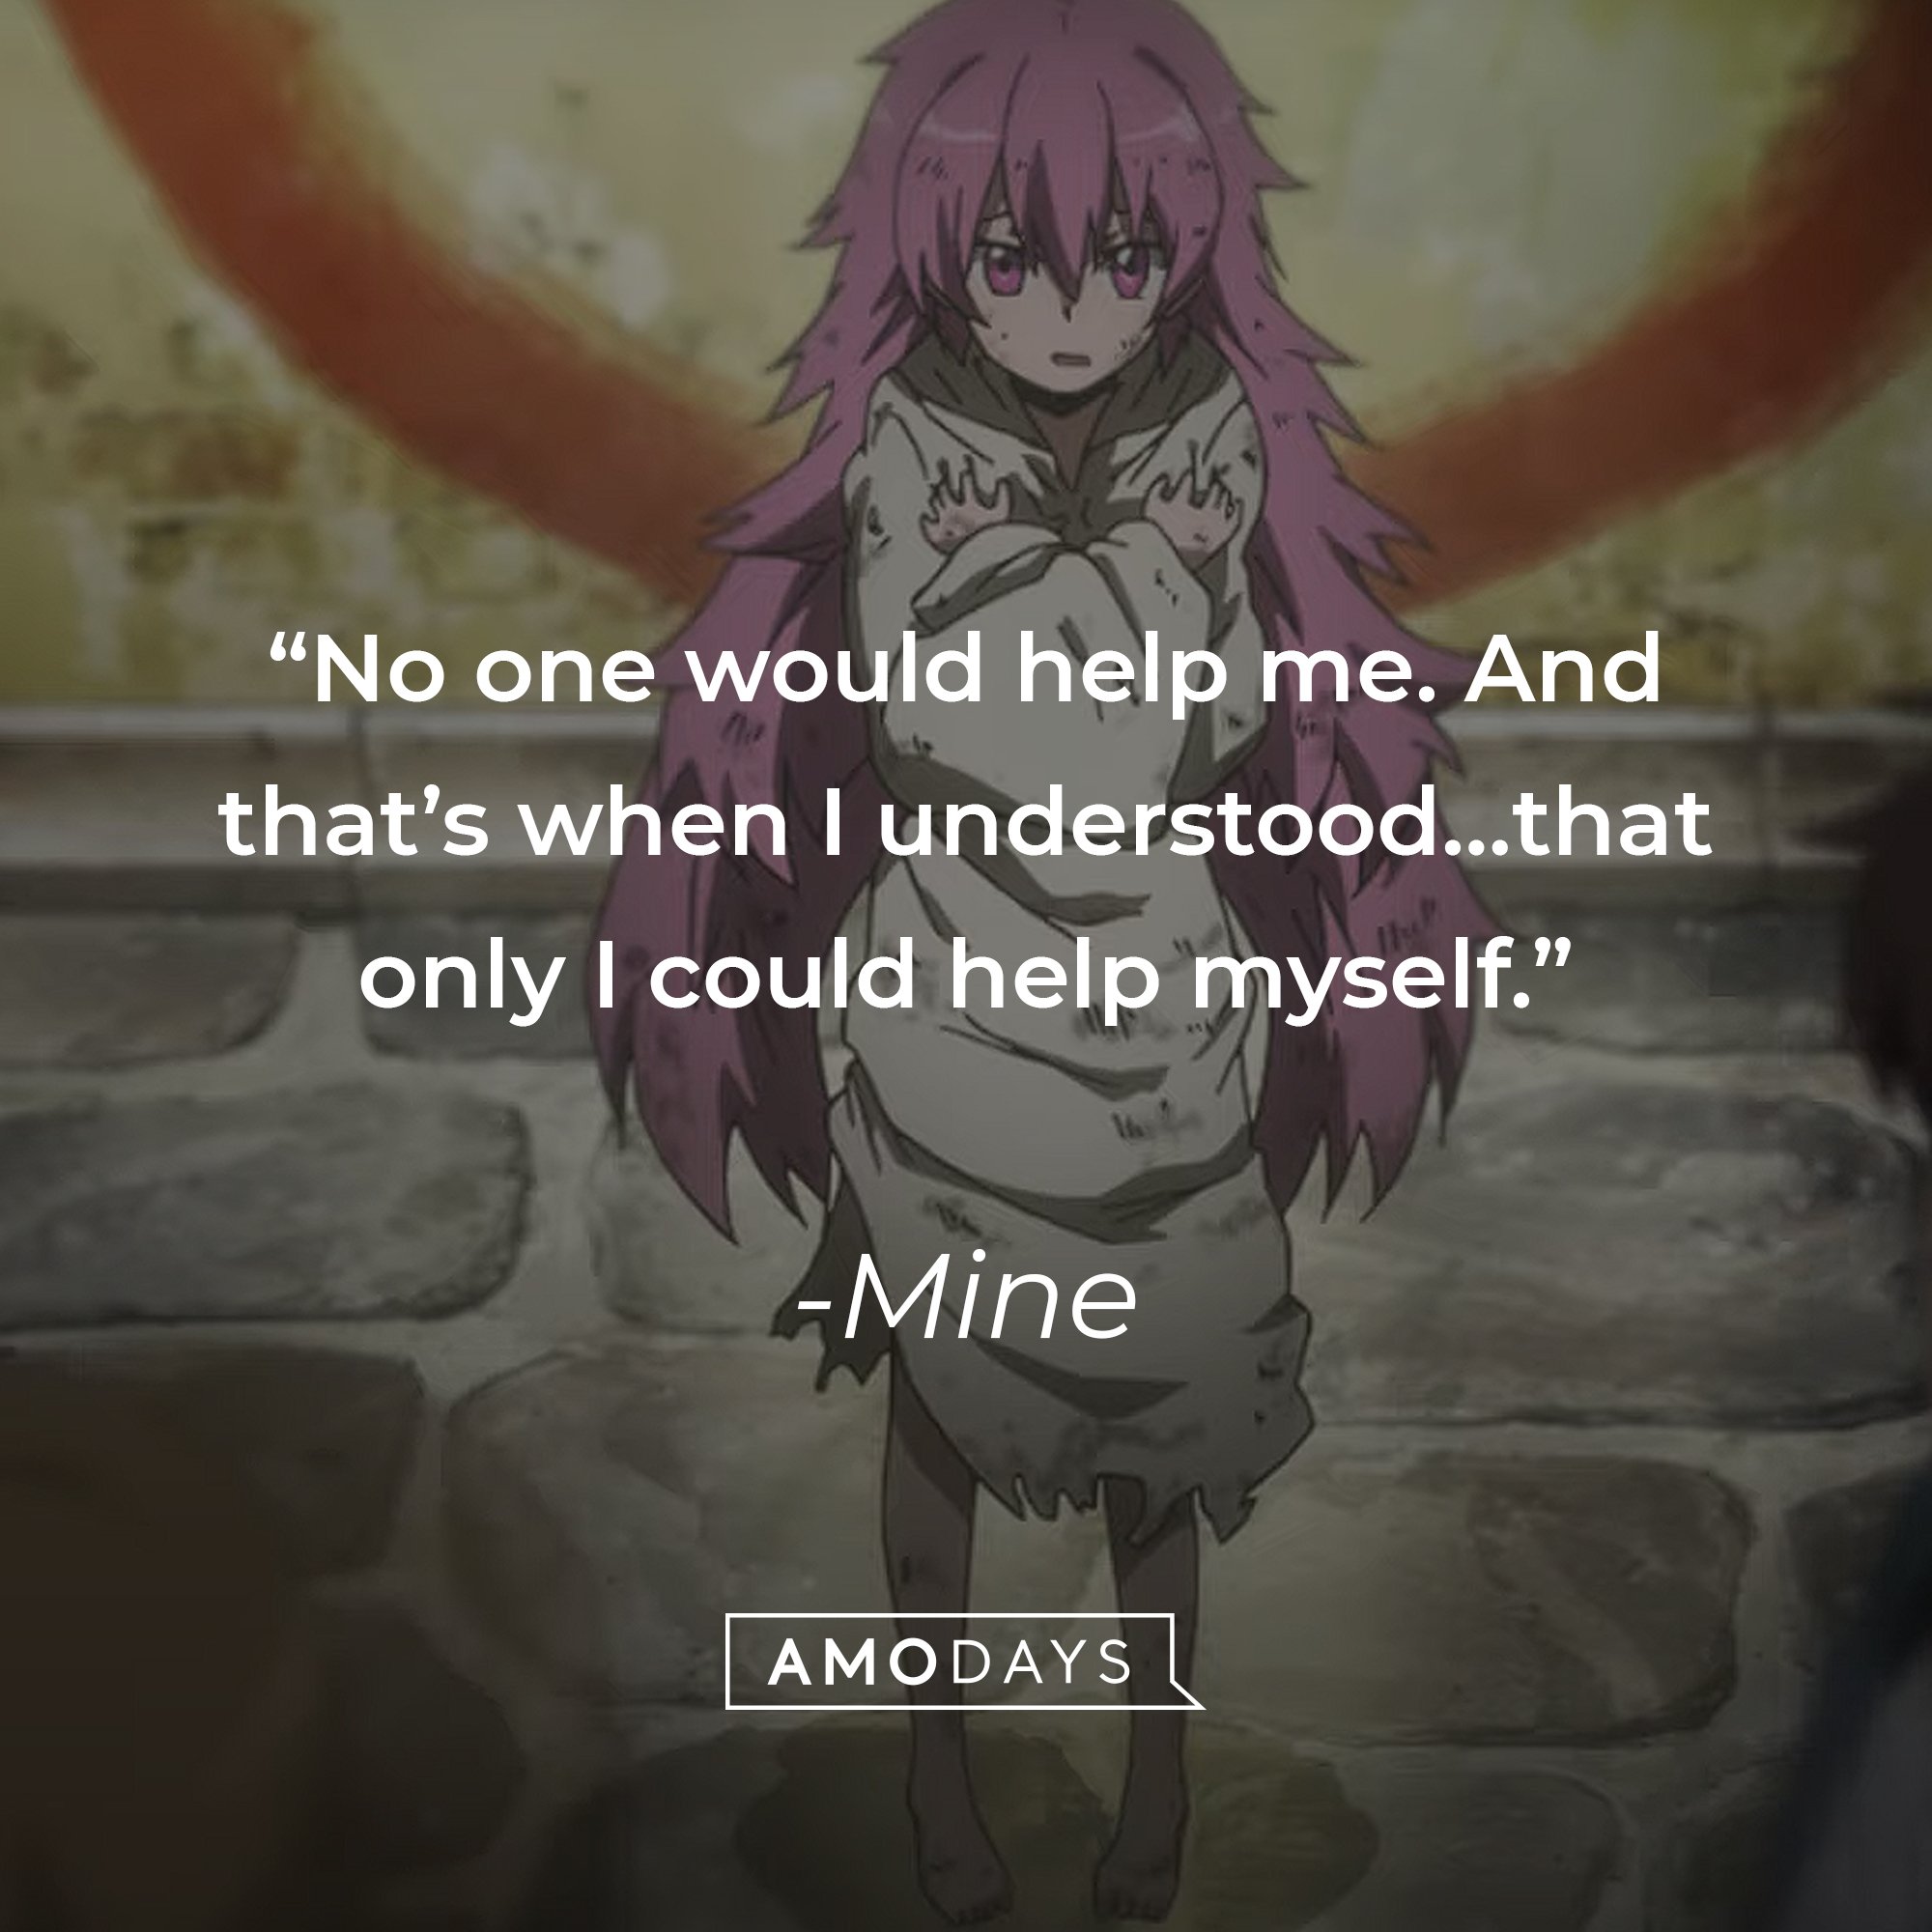 Mine’s quote: “No one would help me. And that’s when I understood…that only I could help myself.” | Image: AmoDays